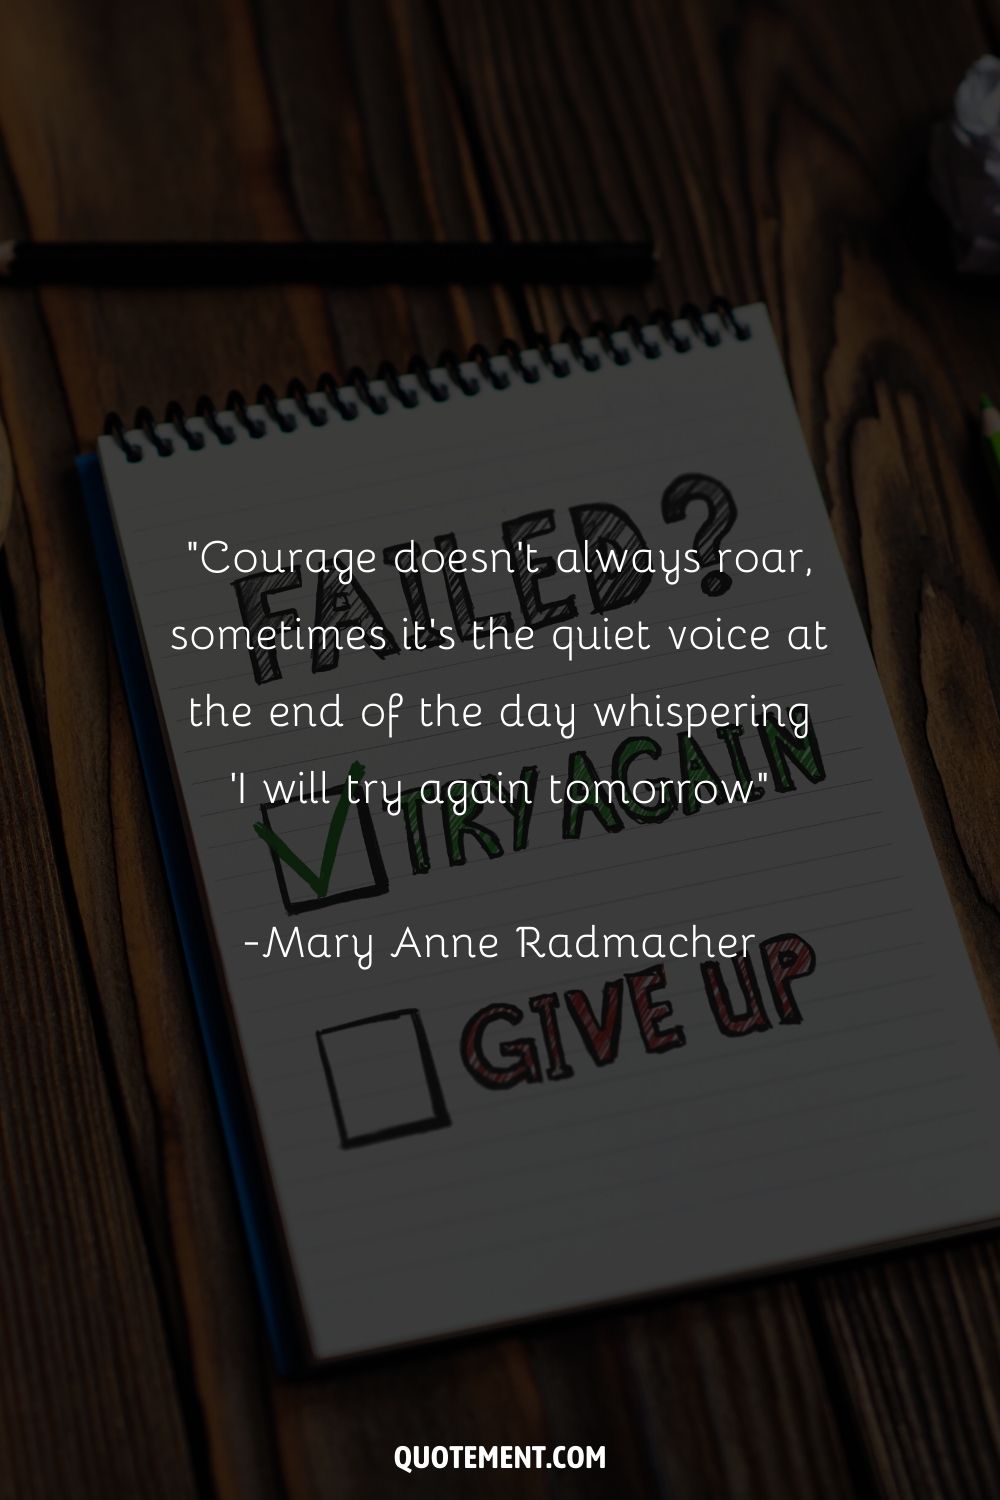 “Courage doesn't always roar, sometimes it's the quiet voice at the end of the day whispering 'I will try again tomorrow” ― Mary Anne Radmacher